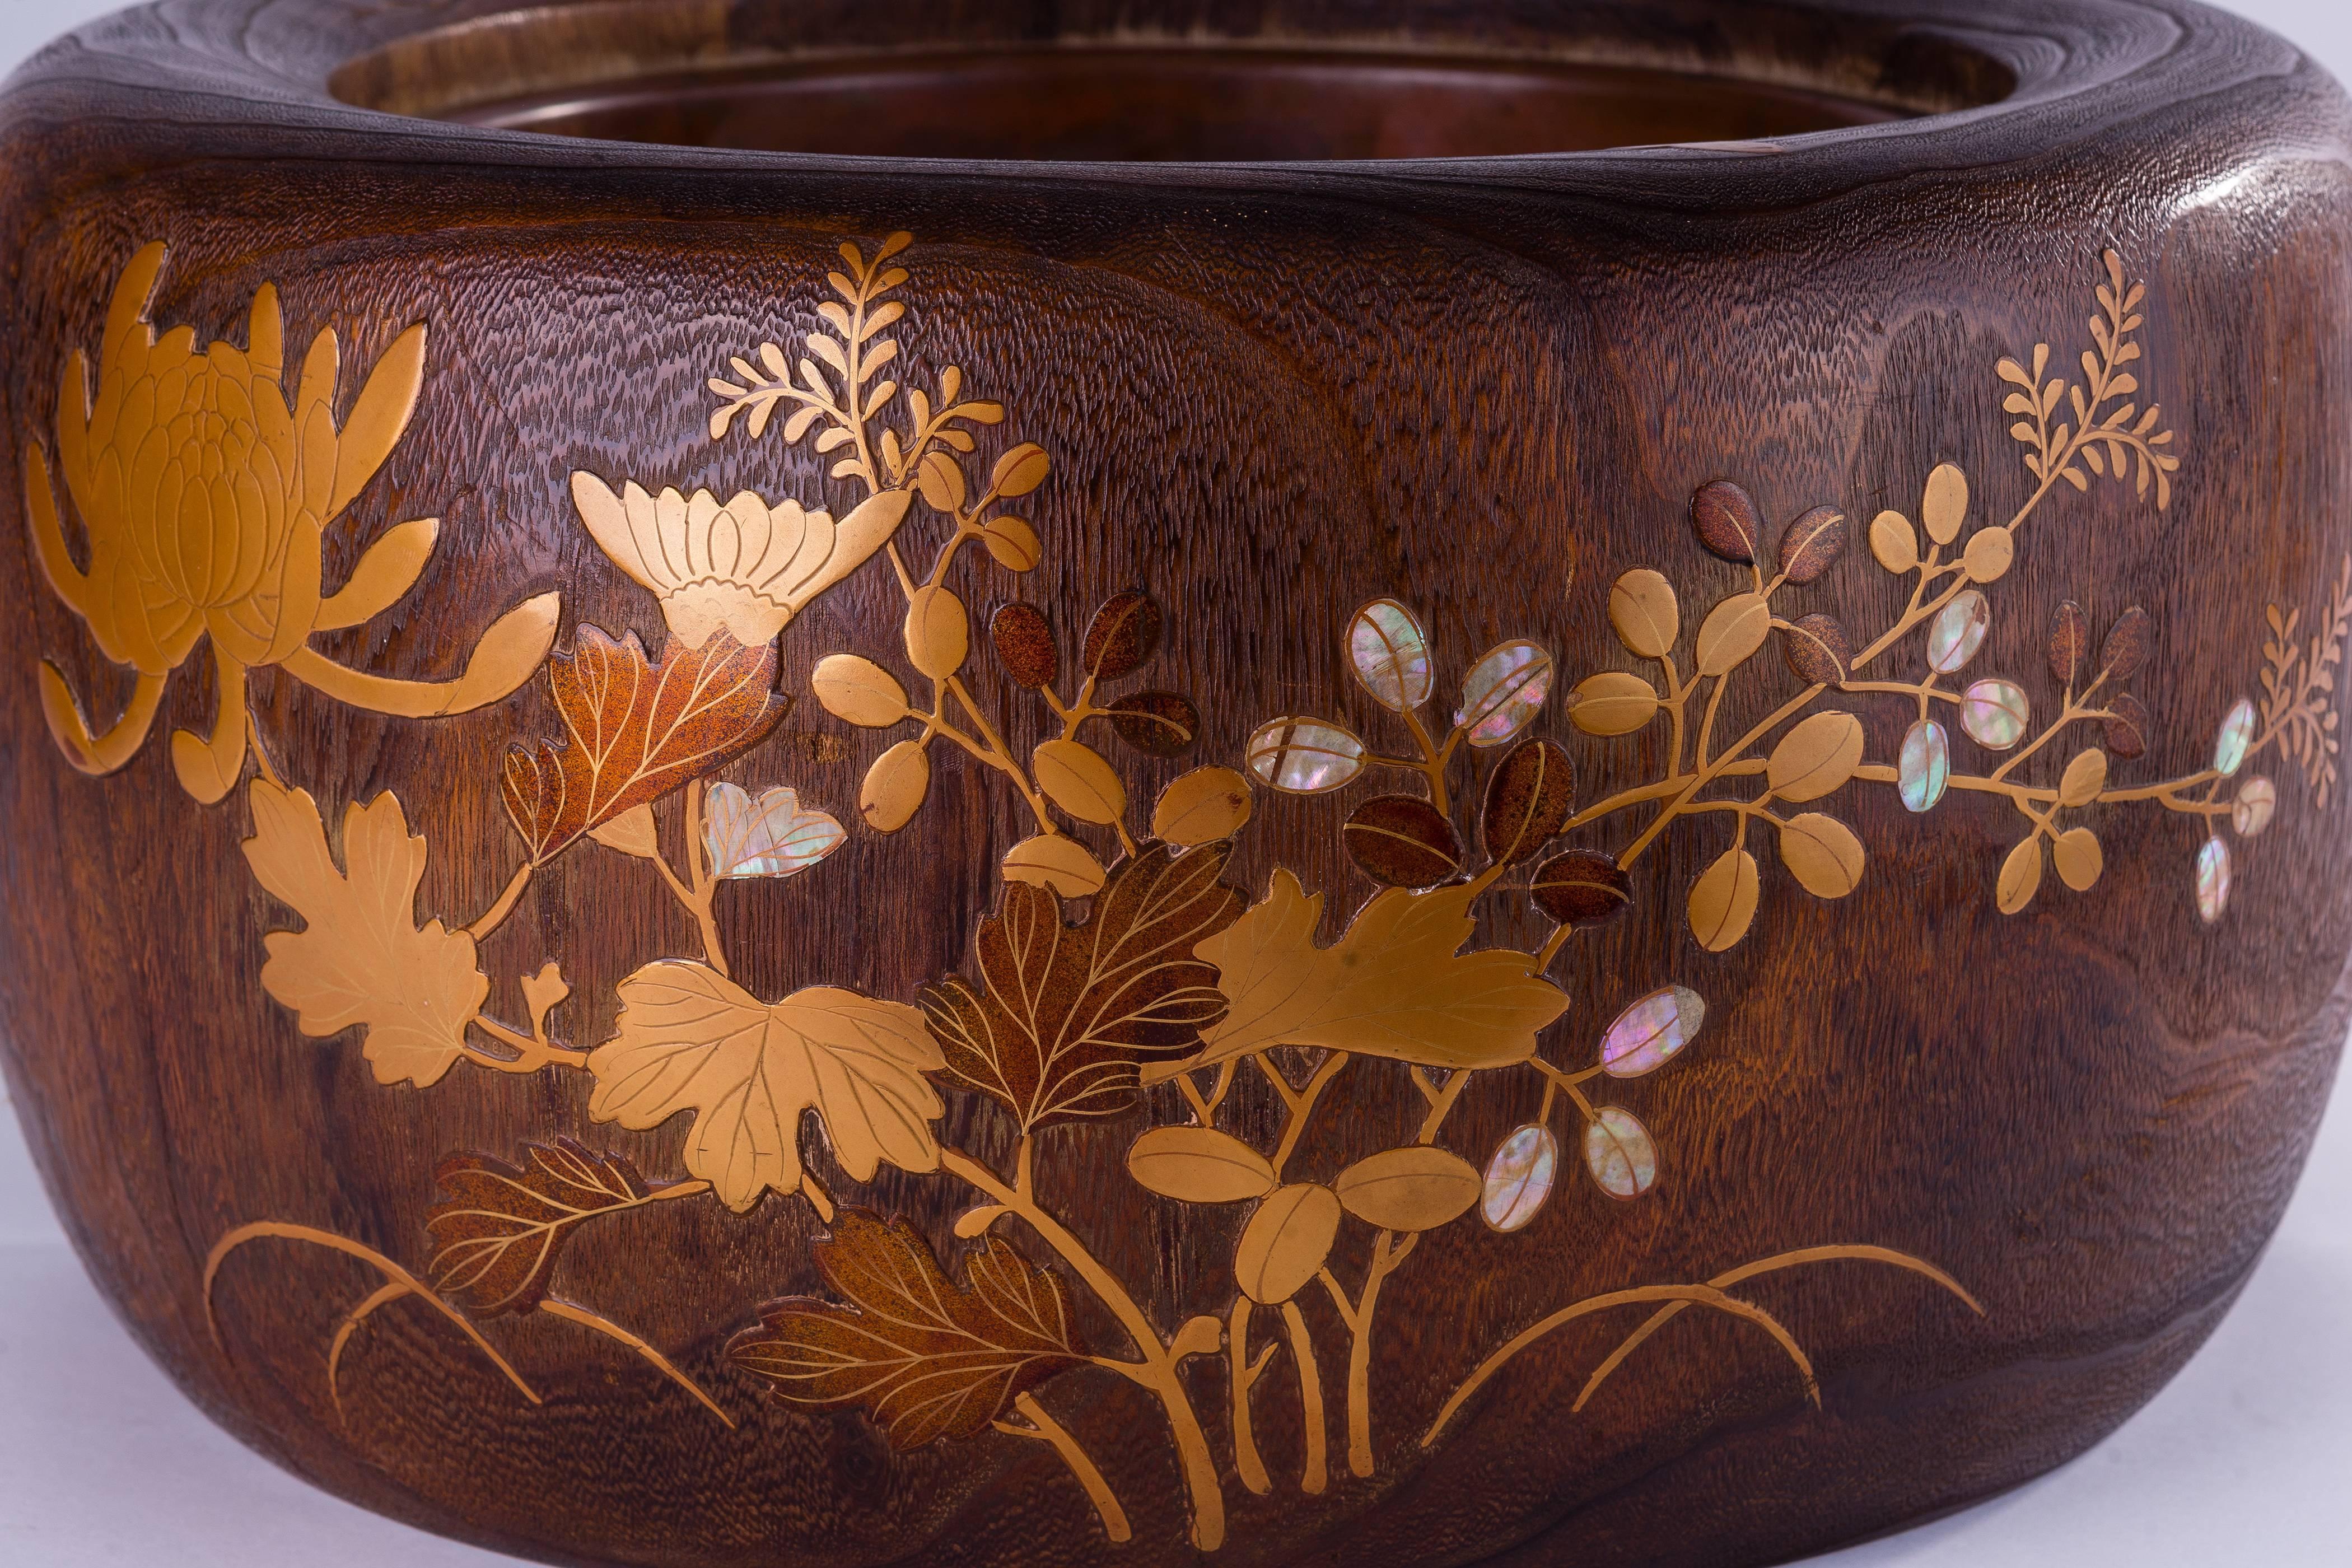 The Japanese hibachi (fire bowl) is handcrafted in wood, finely decorated with chrysanthemum and foliage, and executed meticulously in hand-worked lacquer work with brass and mother-of-pearl inlay. 
The circular hibachi lined with a brass container